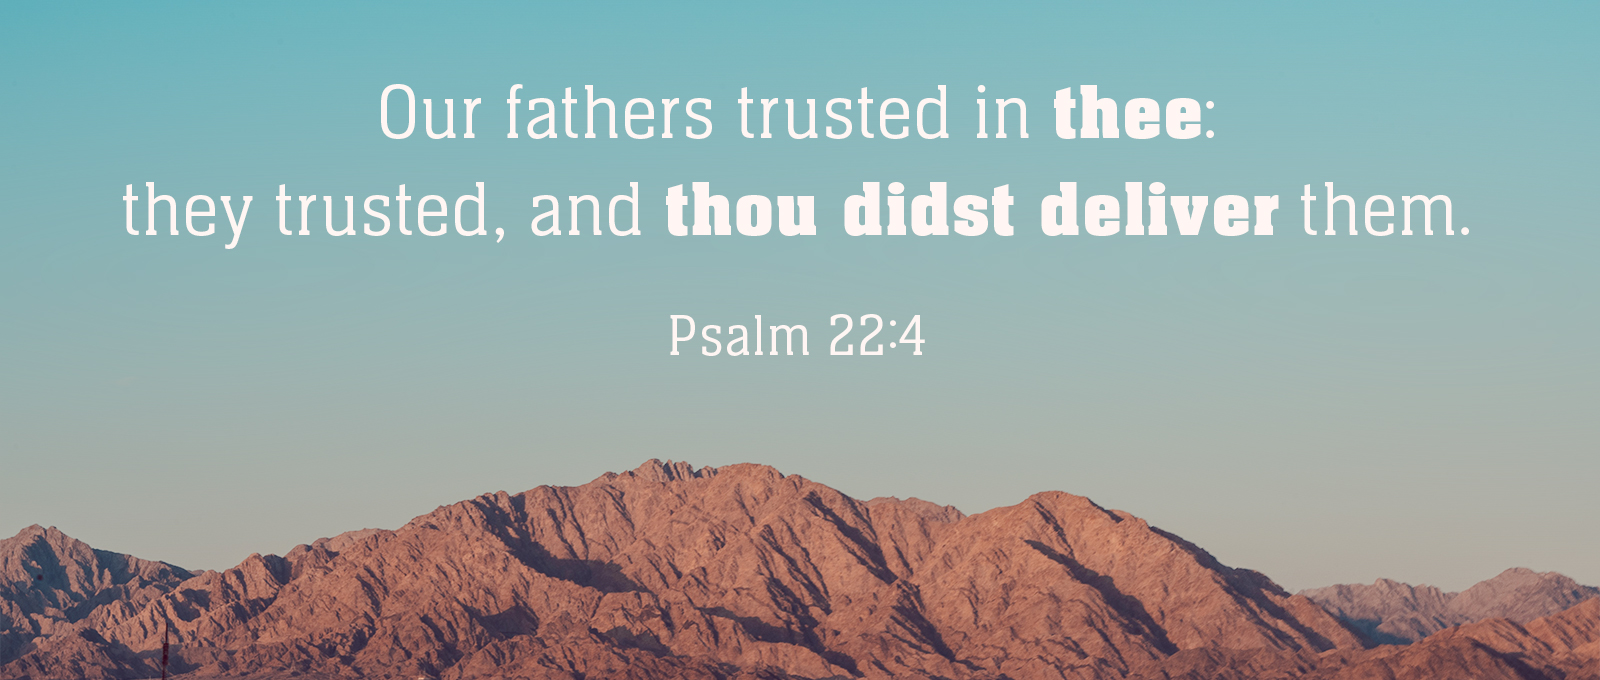 June 1-30 verse slider - Our fathers trusted in thee: they trusted, and thou didst deliver them.